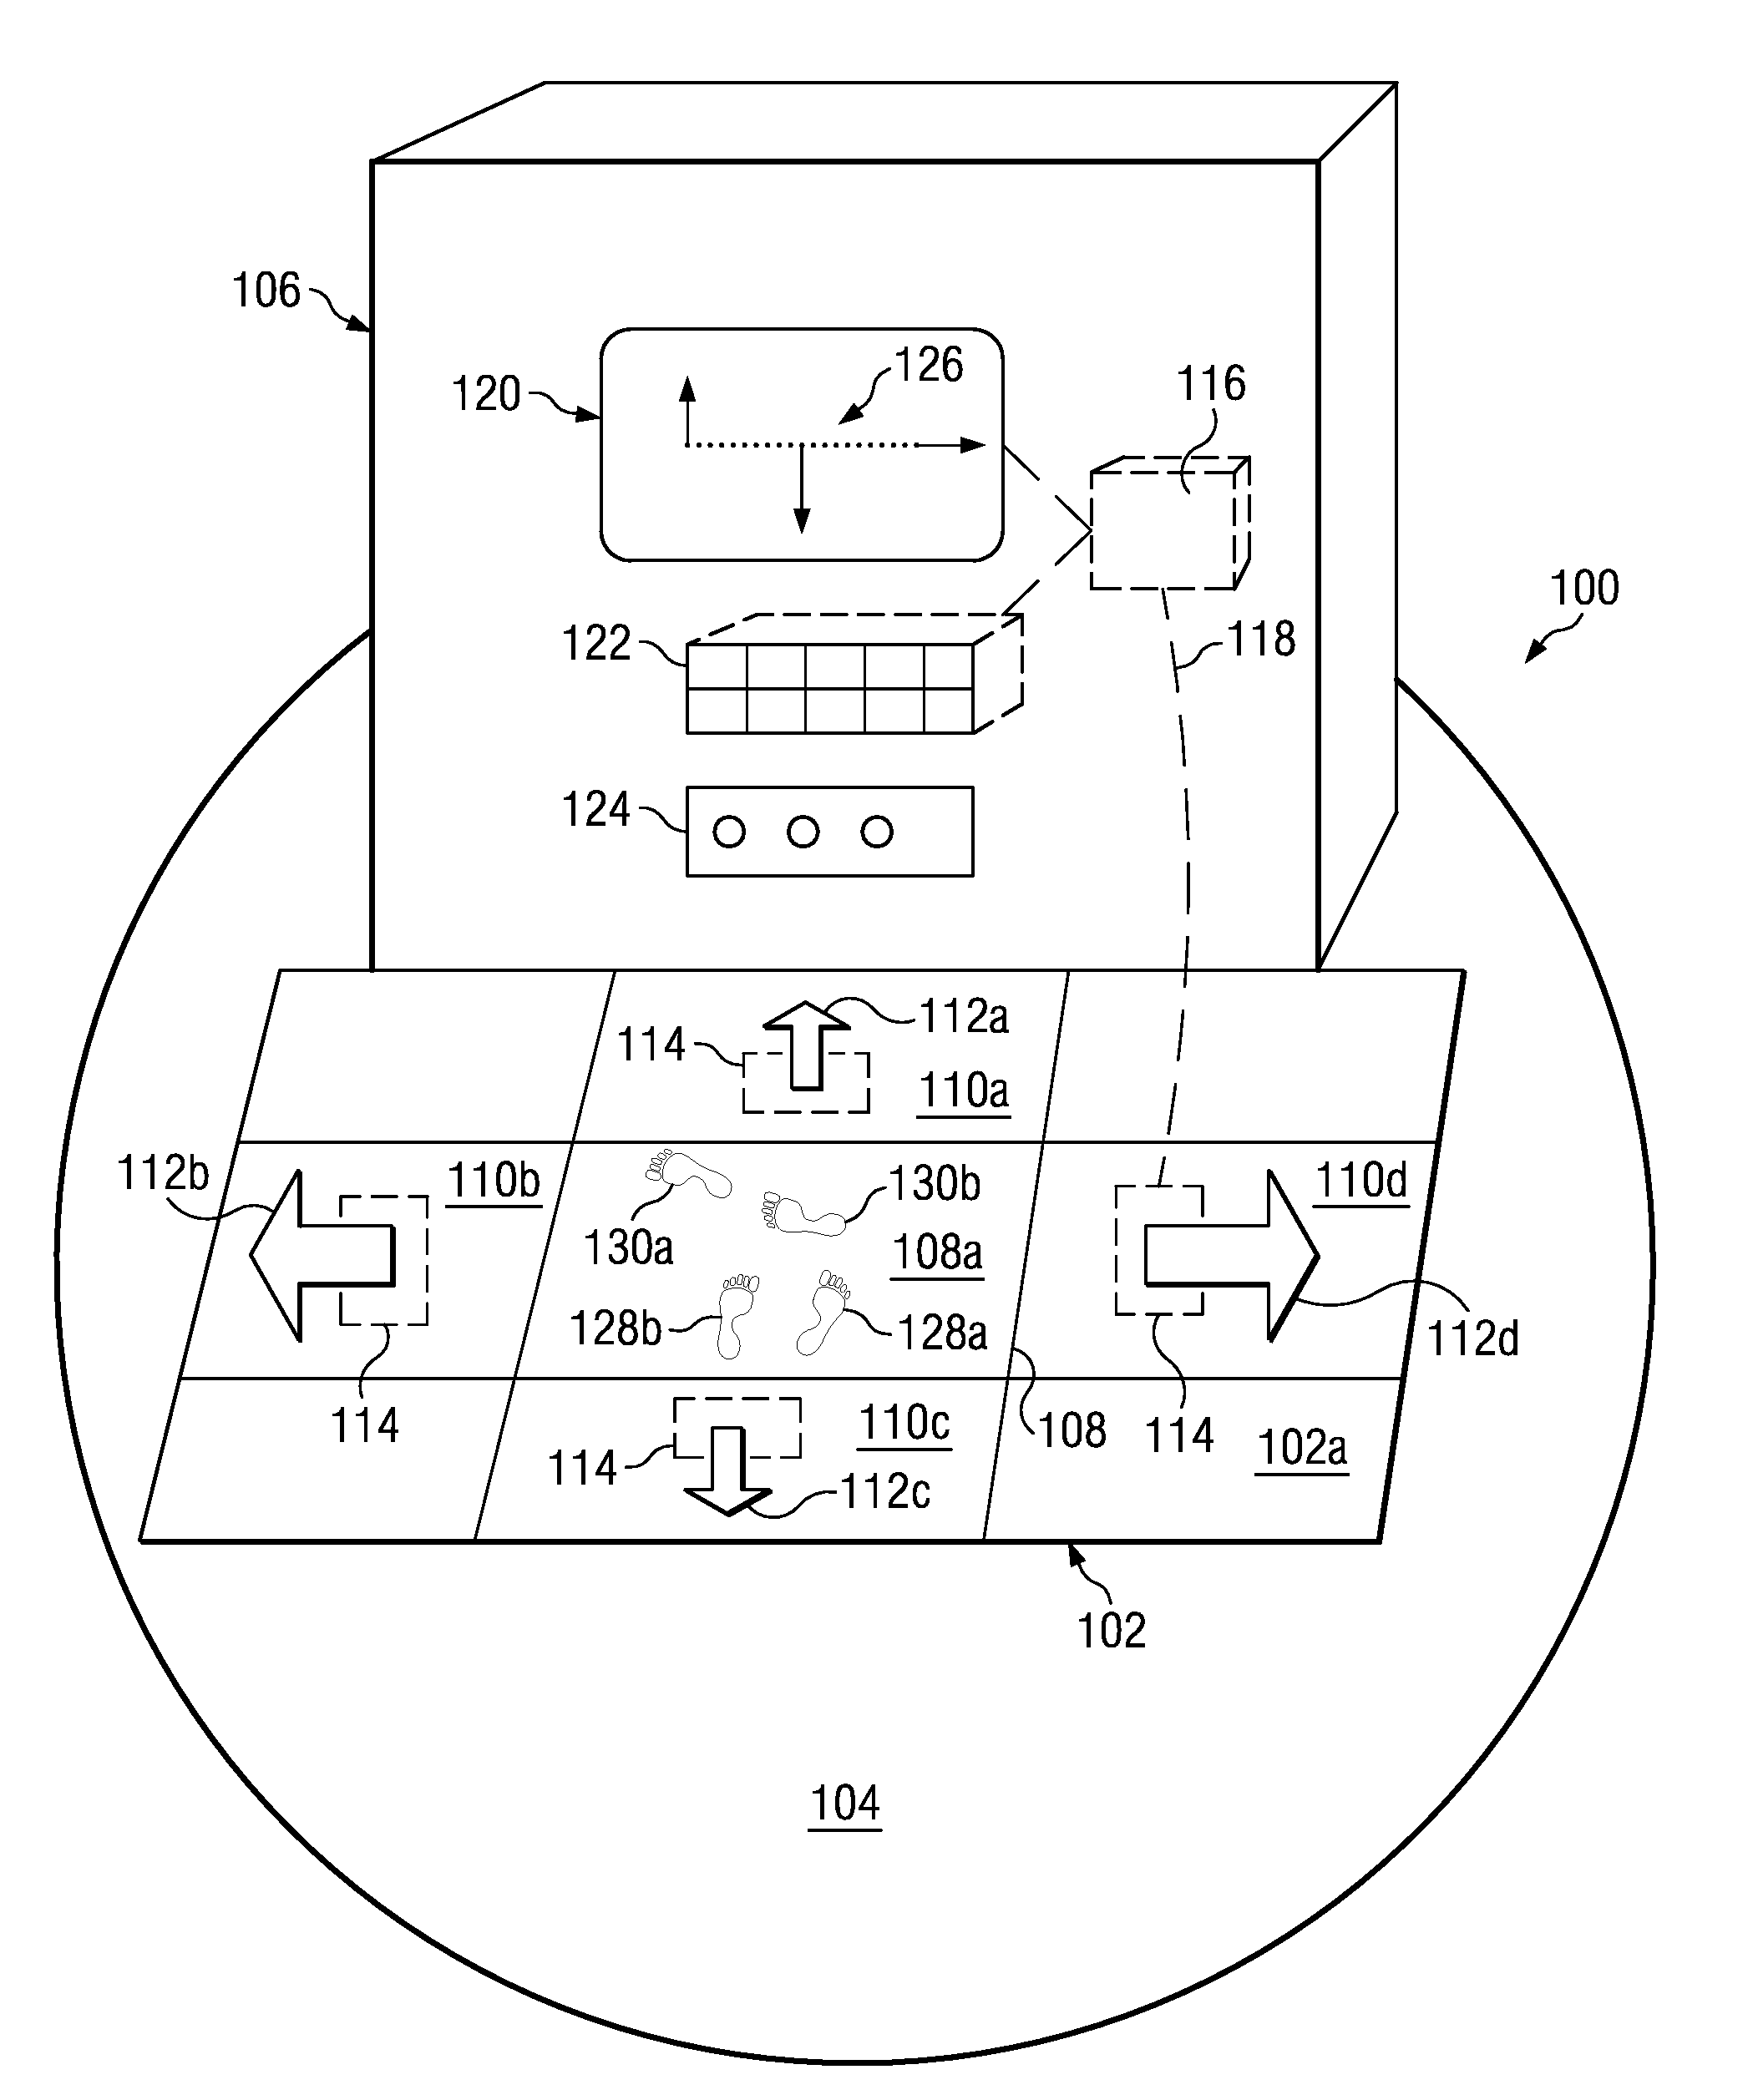 Method for automatically configuring an interactive device based on orientation of a user relative to the device